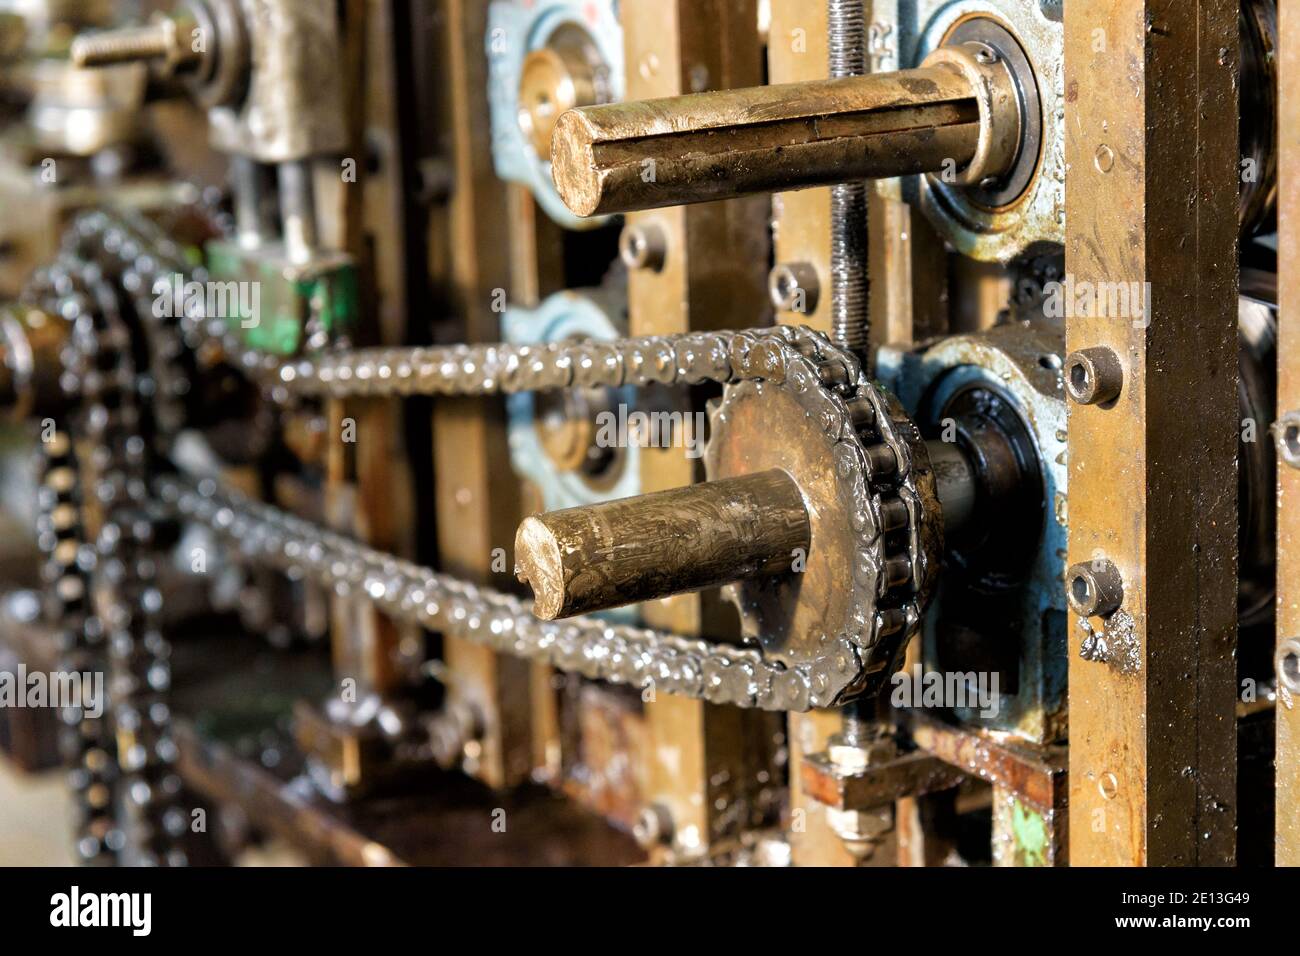 Close up on the master drive chain on industrial machinery showing the toothed gear and sprockets in detail Stock Photo